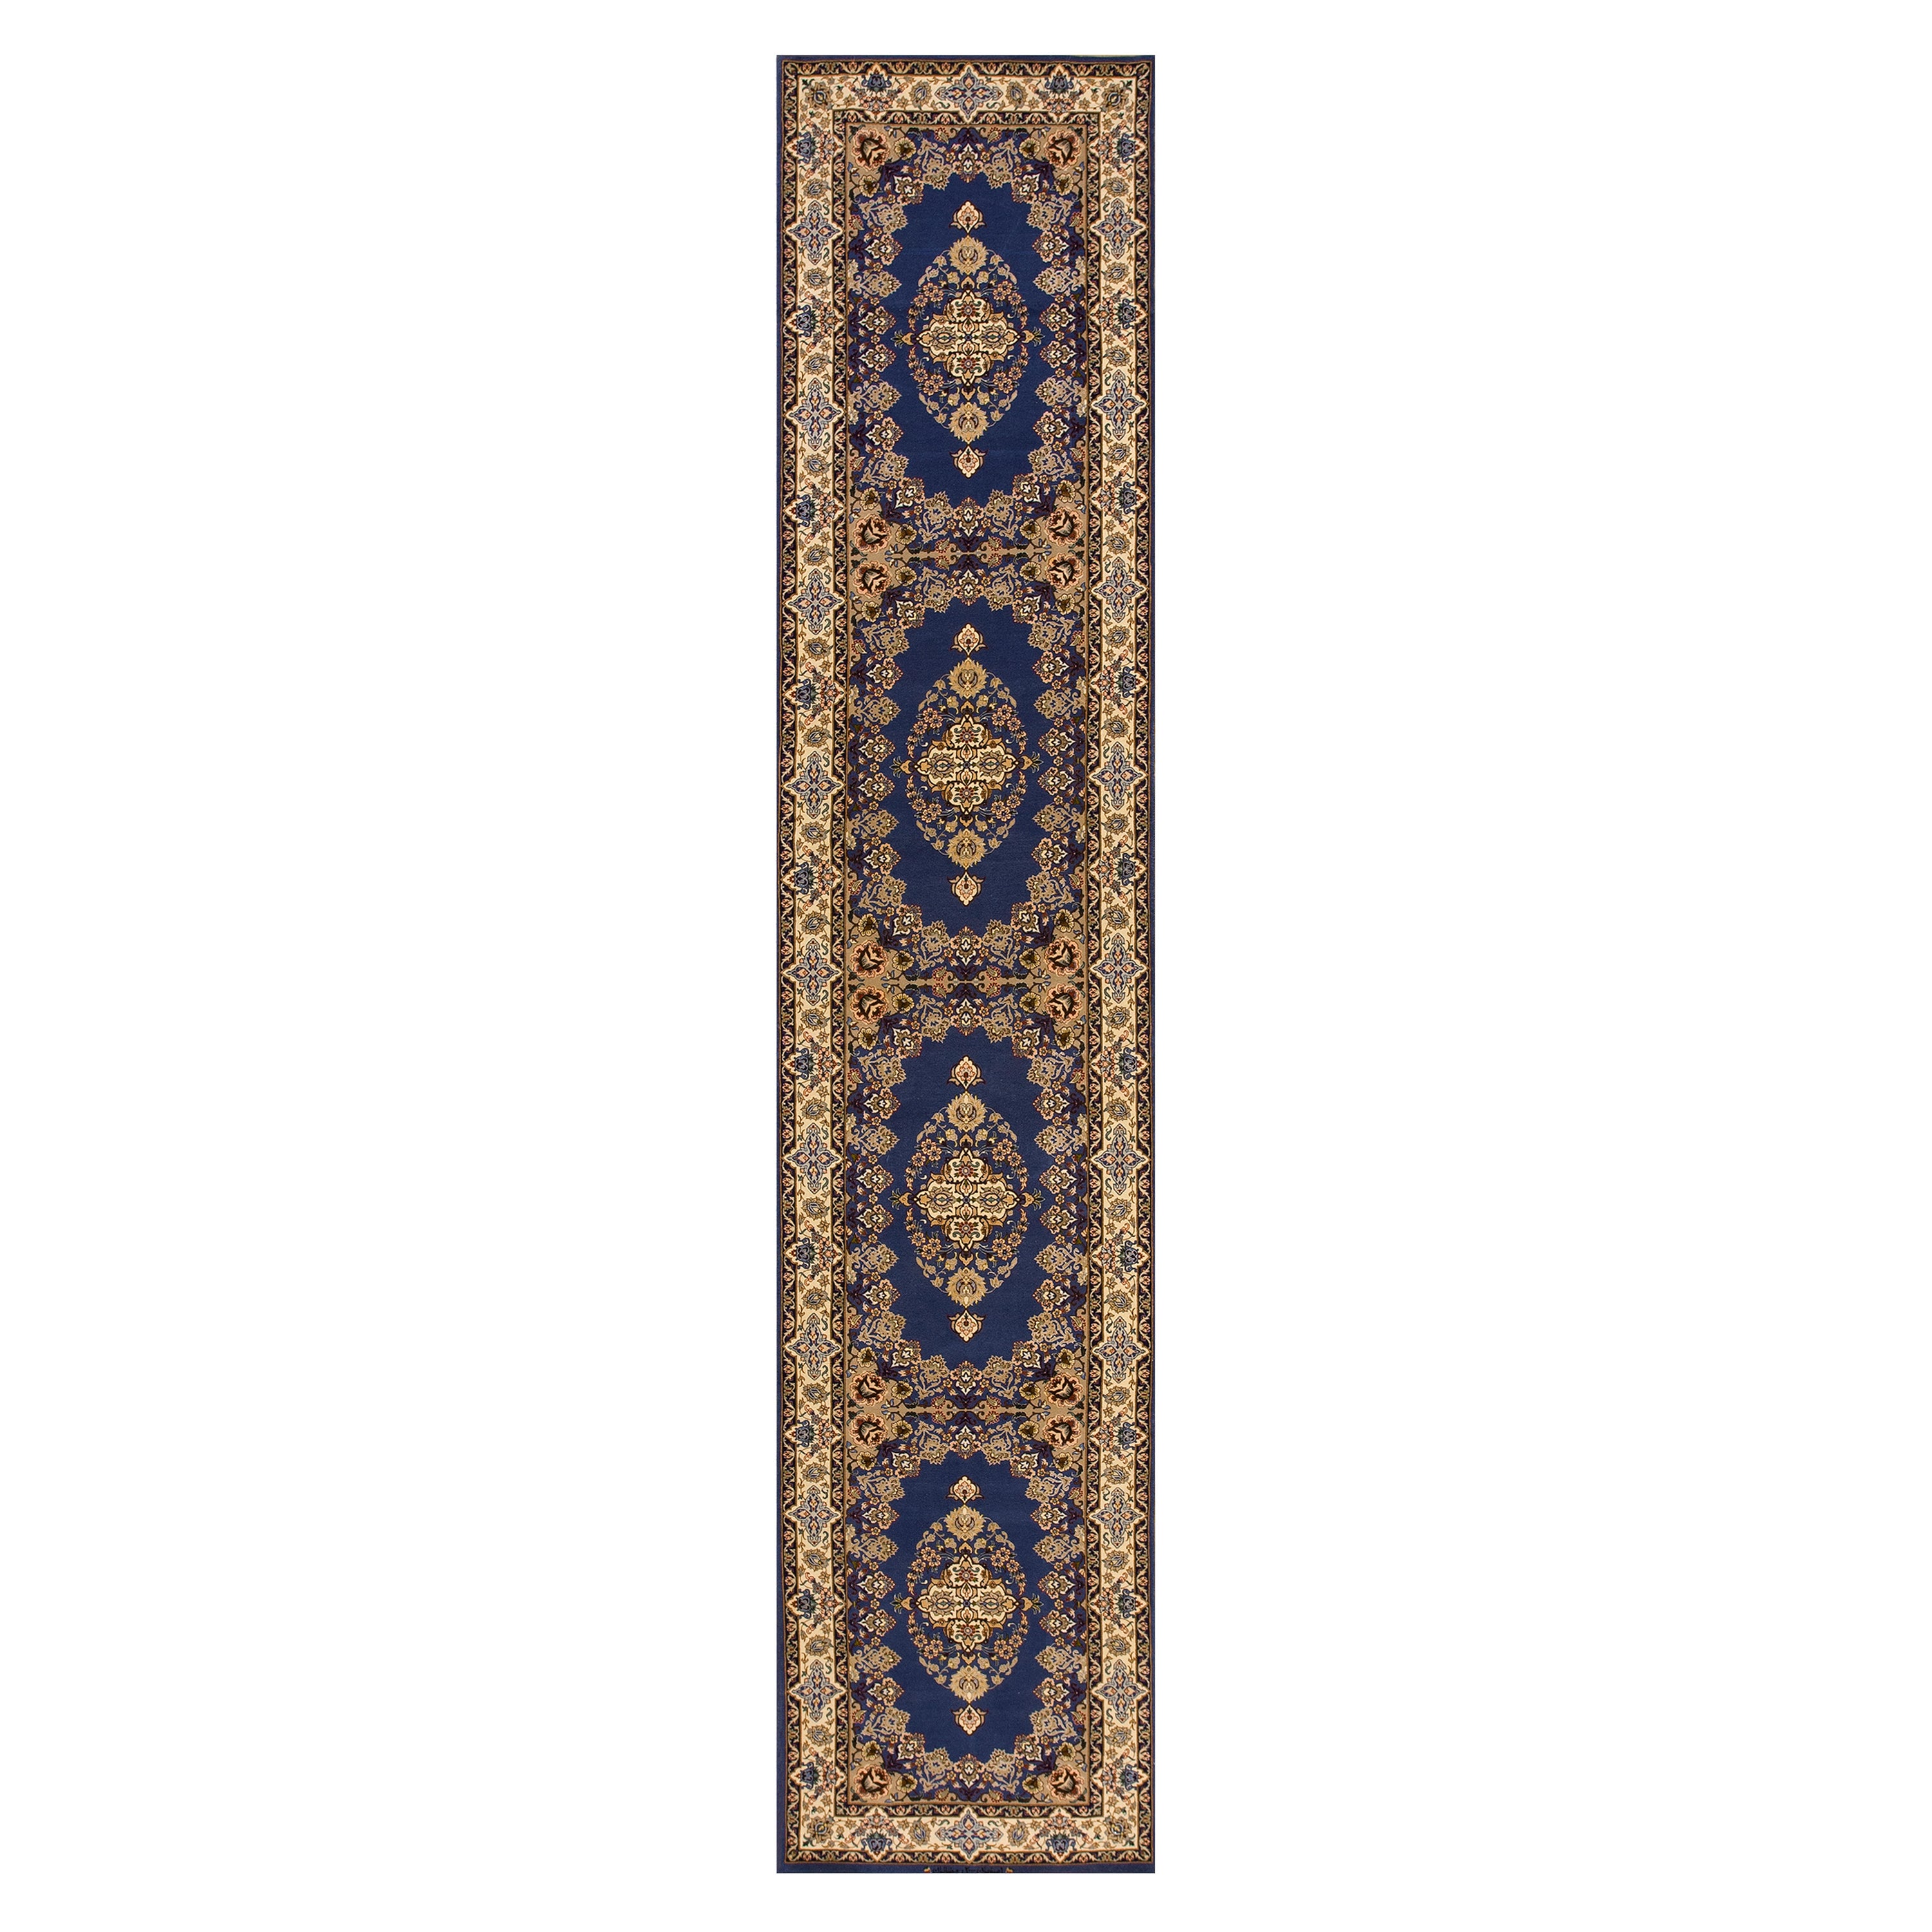 Mid 20th Century Persian Isfahan Runner Carpet ( 2'9" x 13'10" - 85 x 422 ) For Sale